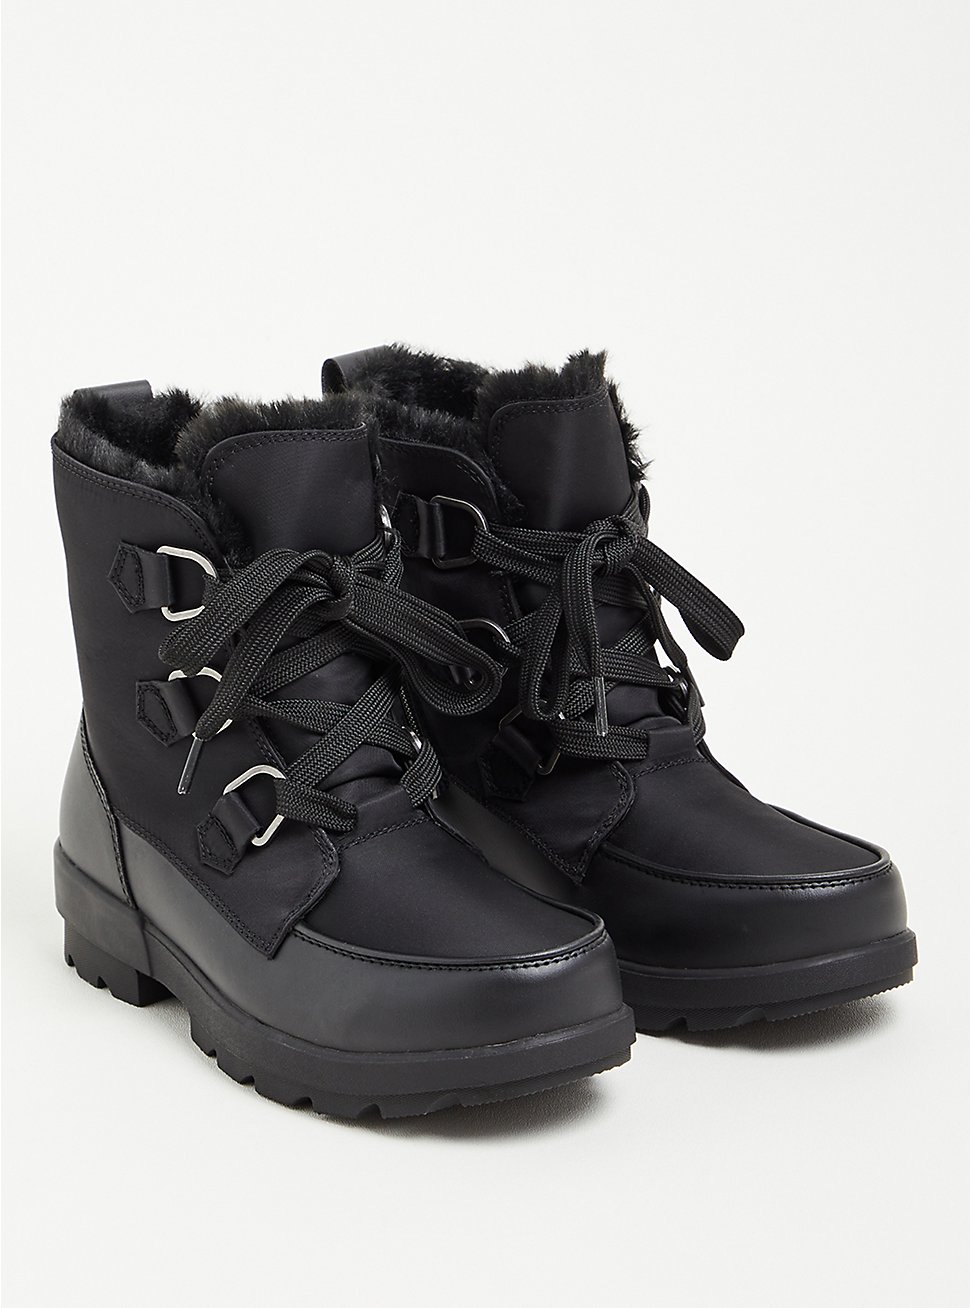 Cold Weather Ankle Bootie - Water Resistant Black (WW), BLACK, hi-res